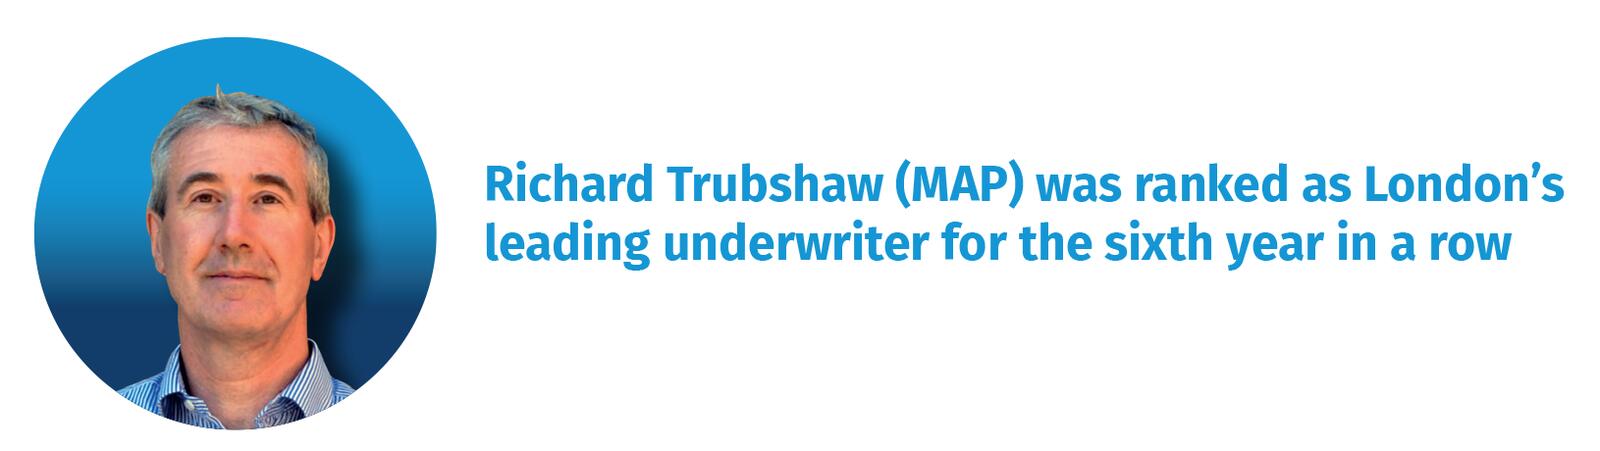 Richard Trubshaw (MAP) was ranked as London’s leading underwriter for the sixth year in a row 